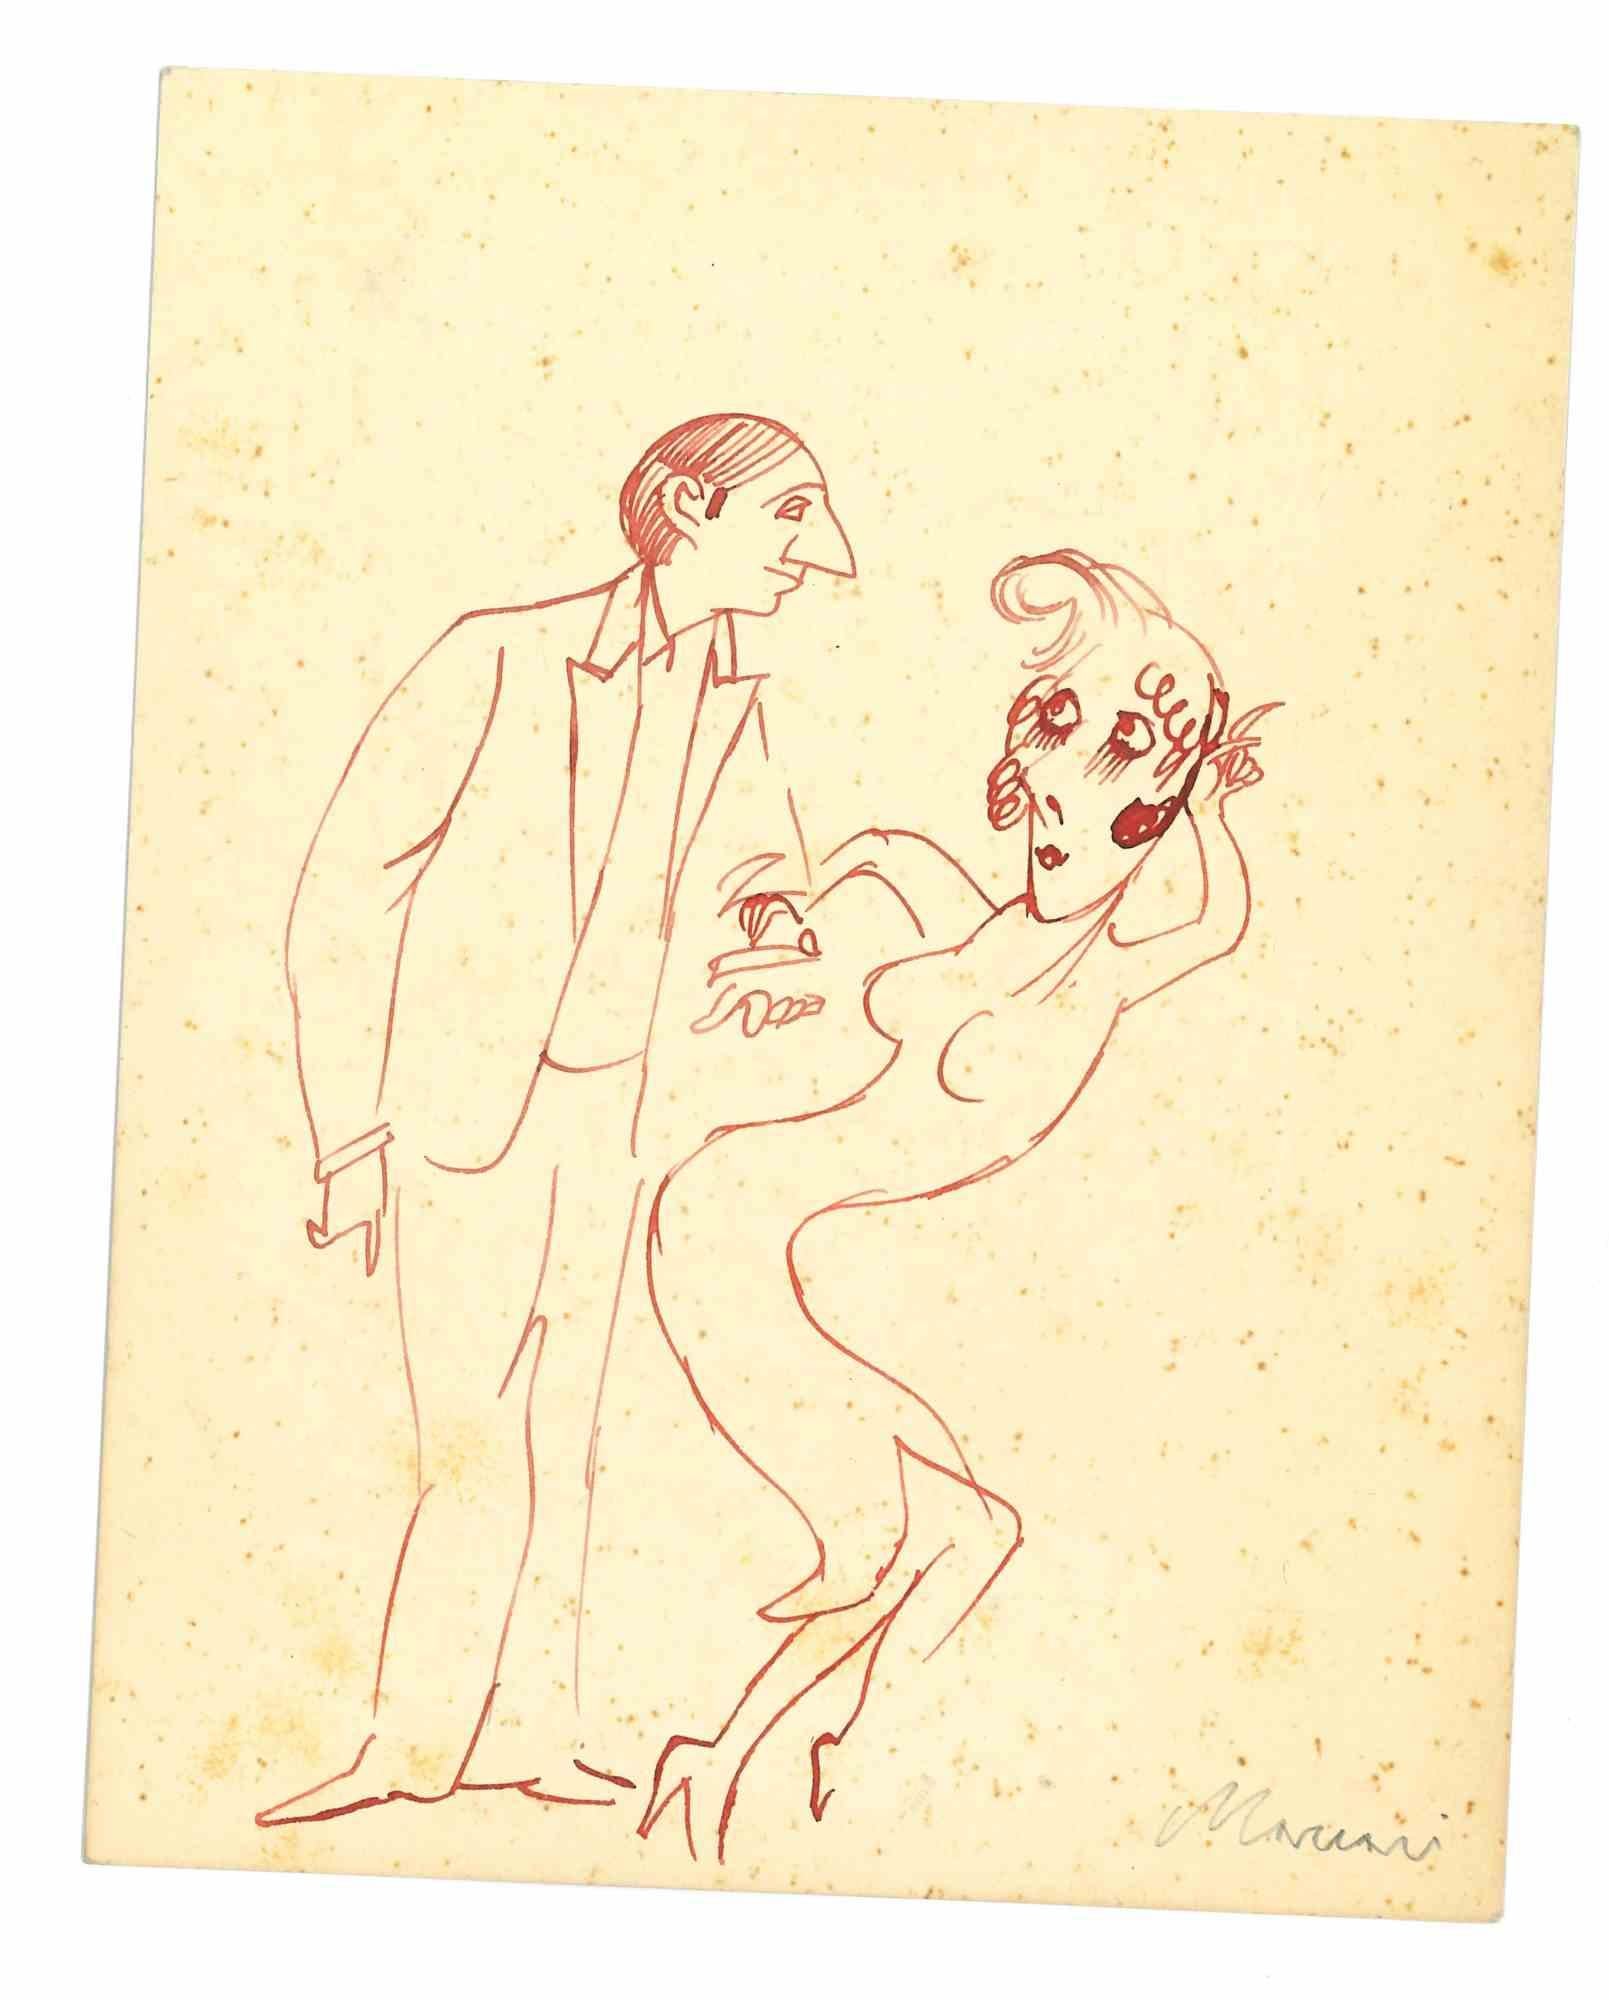 The Couple is a pen Drawing realized by Mino Maccari  (1924-1989) in 1935 ca.

Hand-signed on the lower margin.

Good condition.

Mino Maccari (Siena, 1924-Rome, June 16, 1989) was an Italian writer, painter, engraver and journalist, winner of the